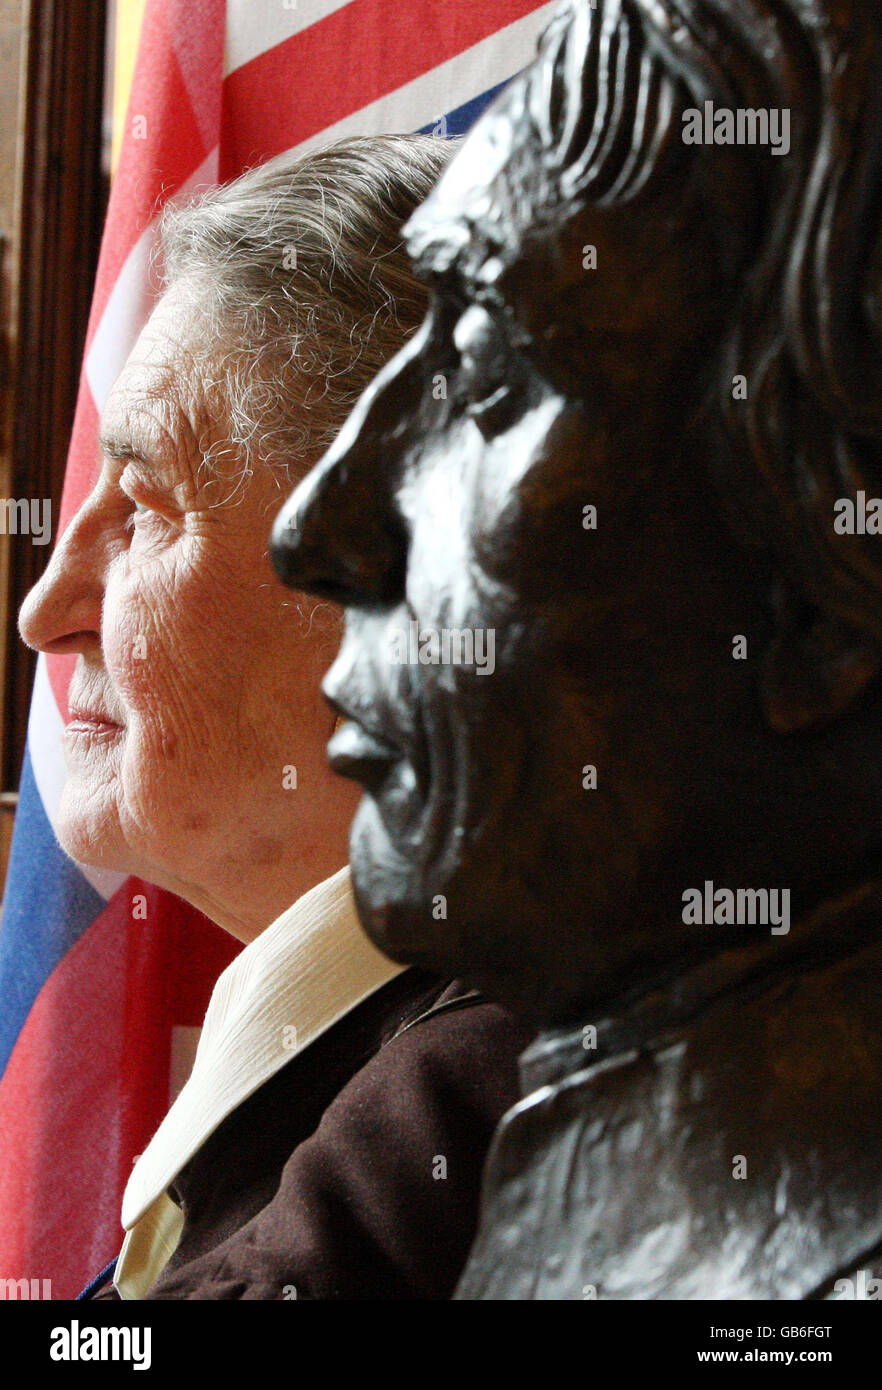 Lord Nelson's Great Great Great Granddaughter Anna Tribe, from Wales, stands next to a life-size bronze bust of Vice Admiral Lord Nelson which was unveiled by the Second Sea Lord, Vice Admiral Alan Massey at the Naval Base in Portsmouth. Stock Photo